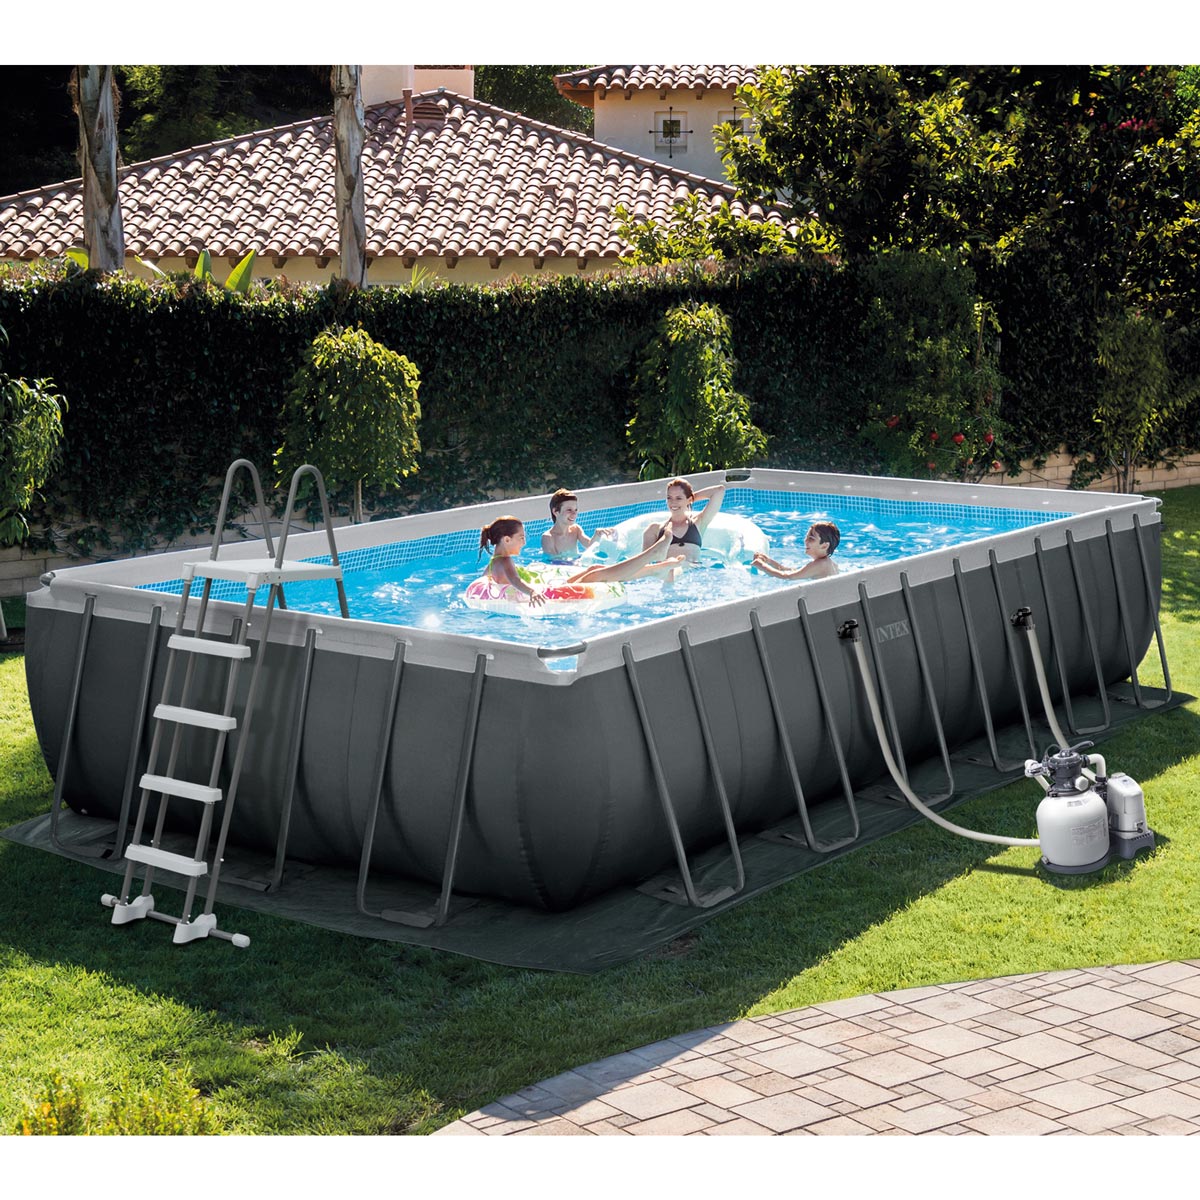 Intex 24ft (7.3m) x 12ft (3.6m) Ultra XTR Rectangular Frame Pool with Sand Filter Pump, Saltwater System and Accessories